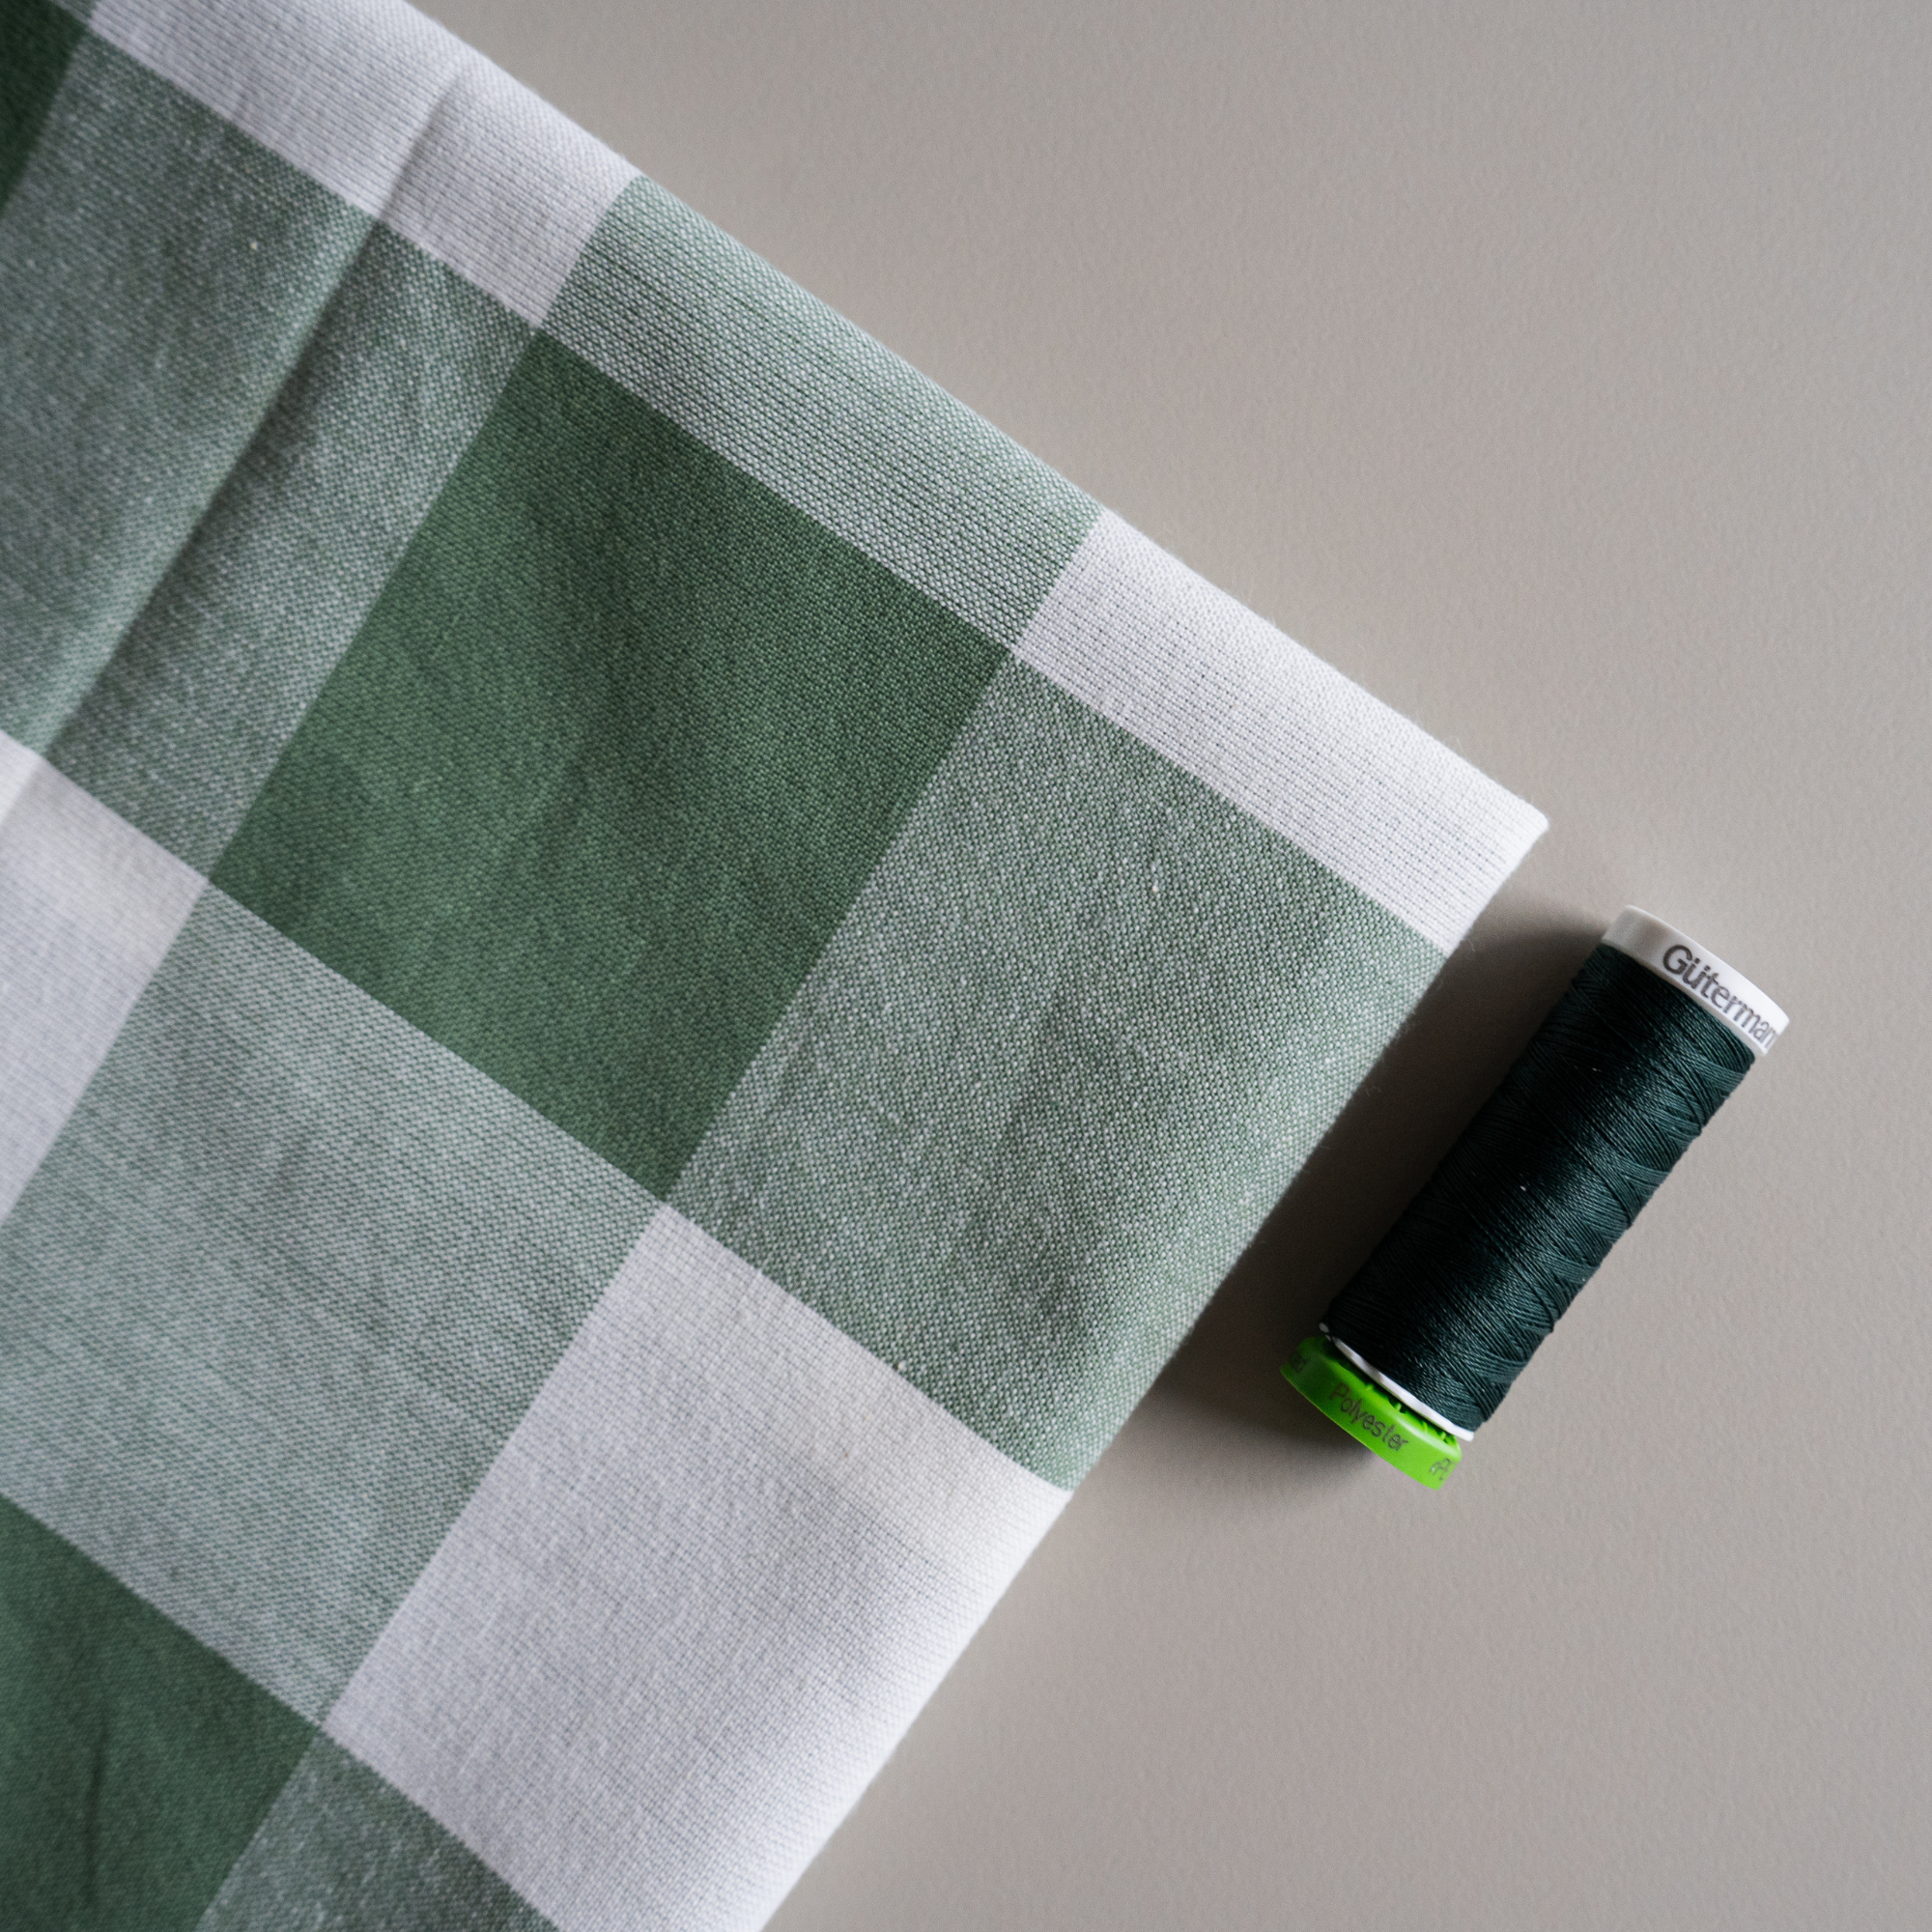 Cotton - Large Green Gingham Check - Fabric